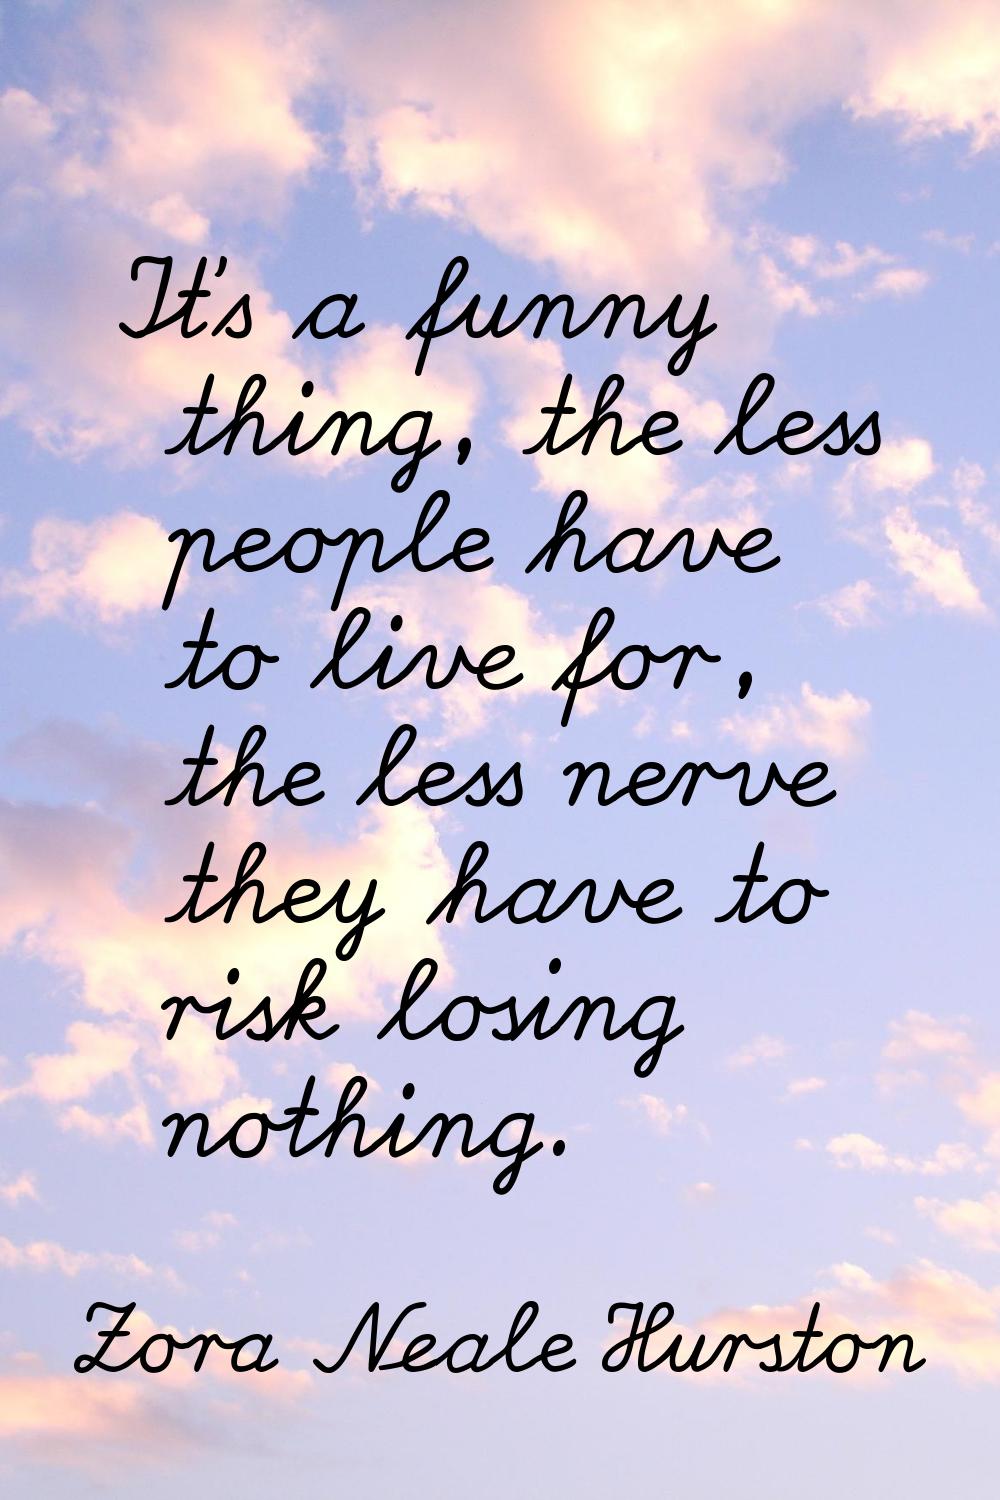 It's a funny thing, the less people have to live for, the less nerve they have to risk losing nothi